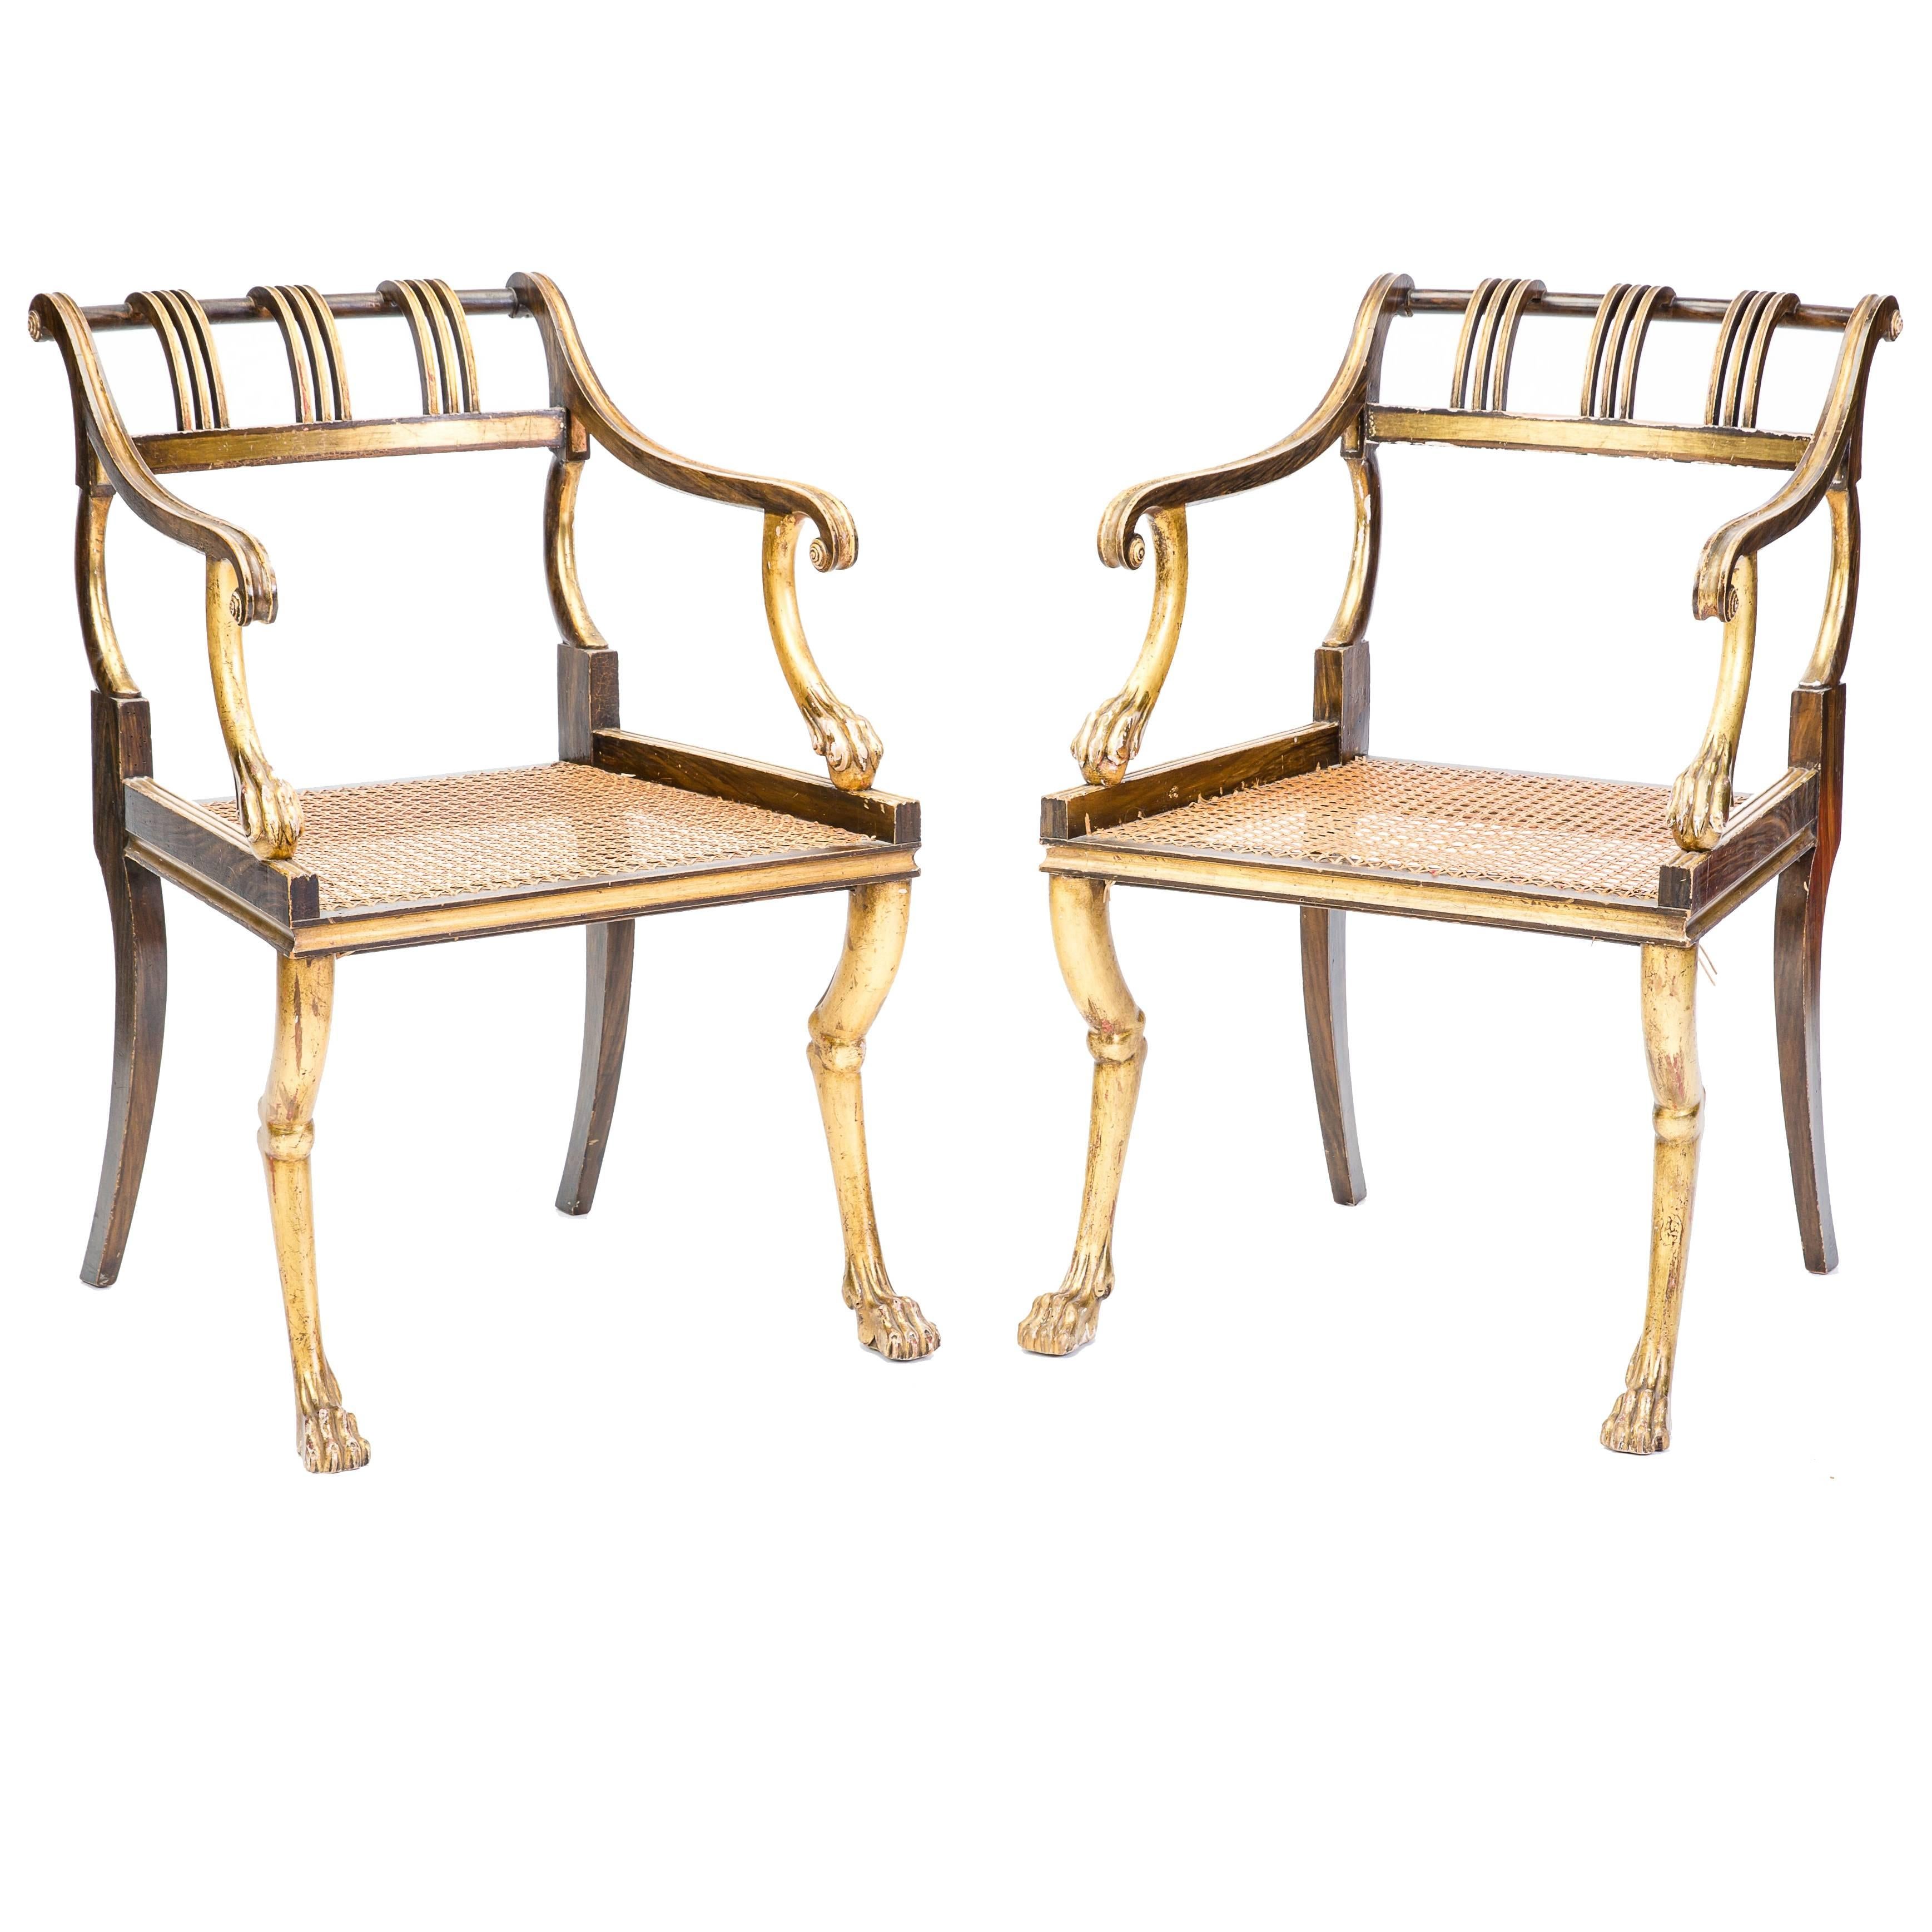 Pair of Early 19th Century Regency Style Chairs